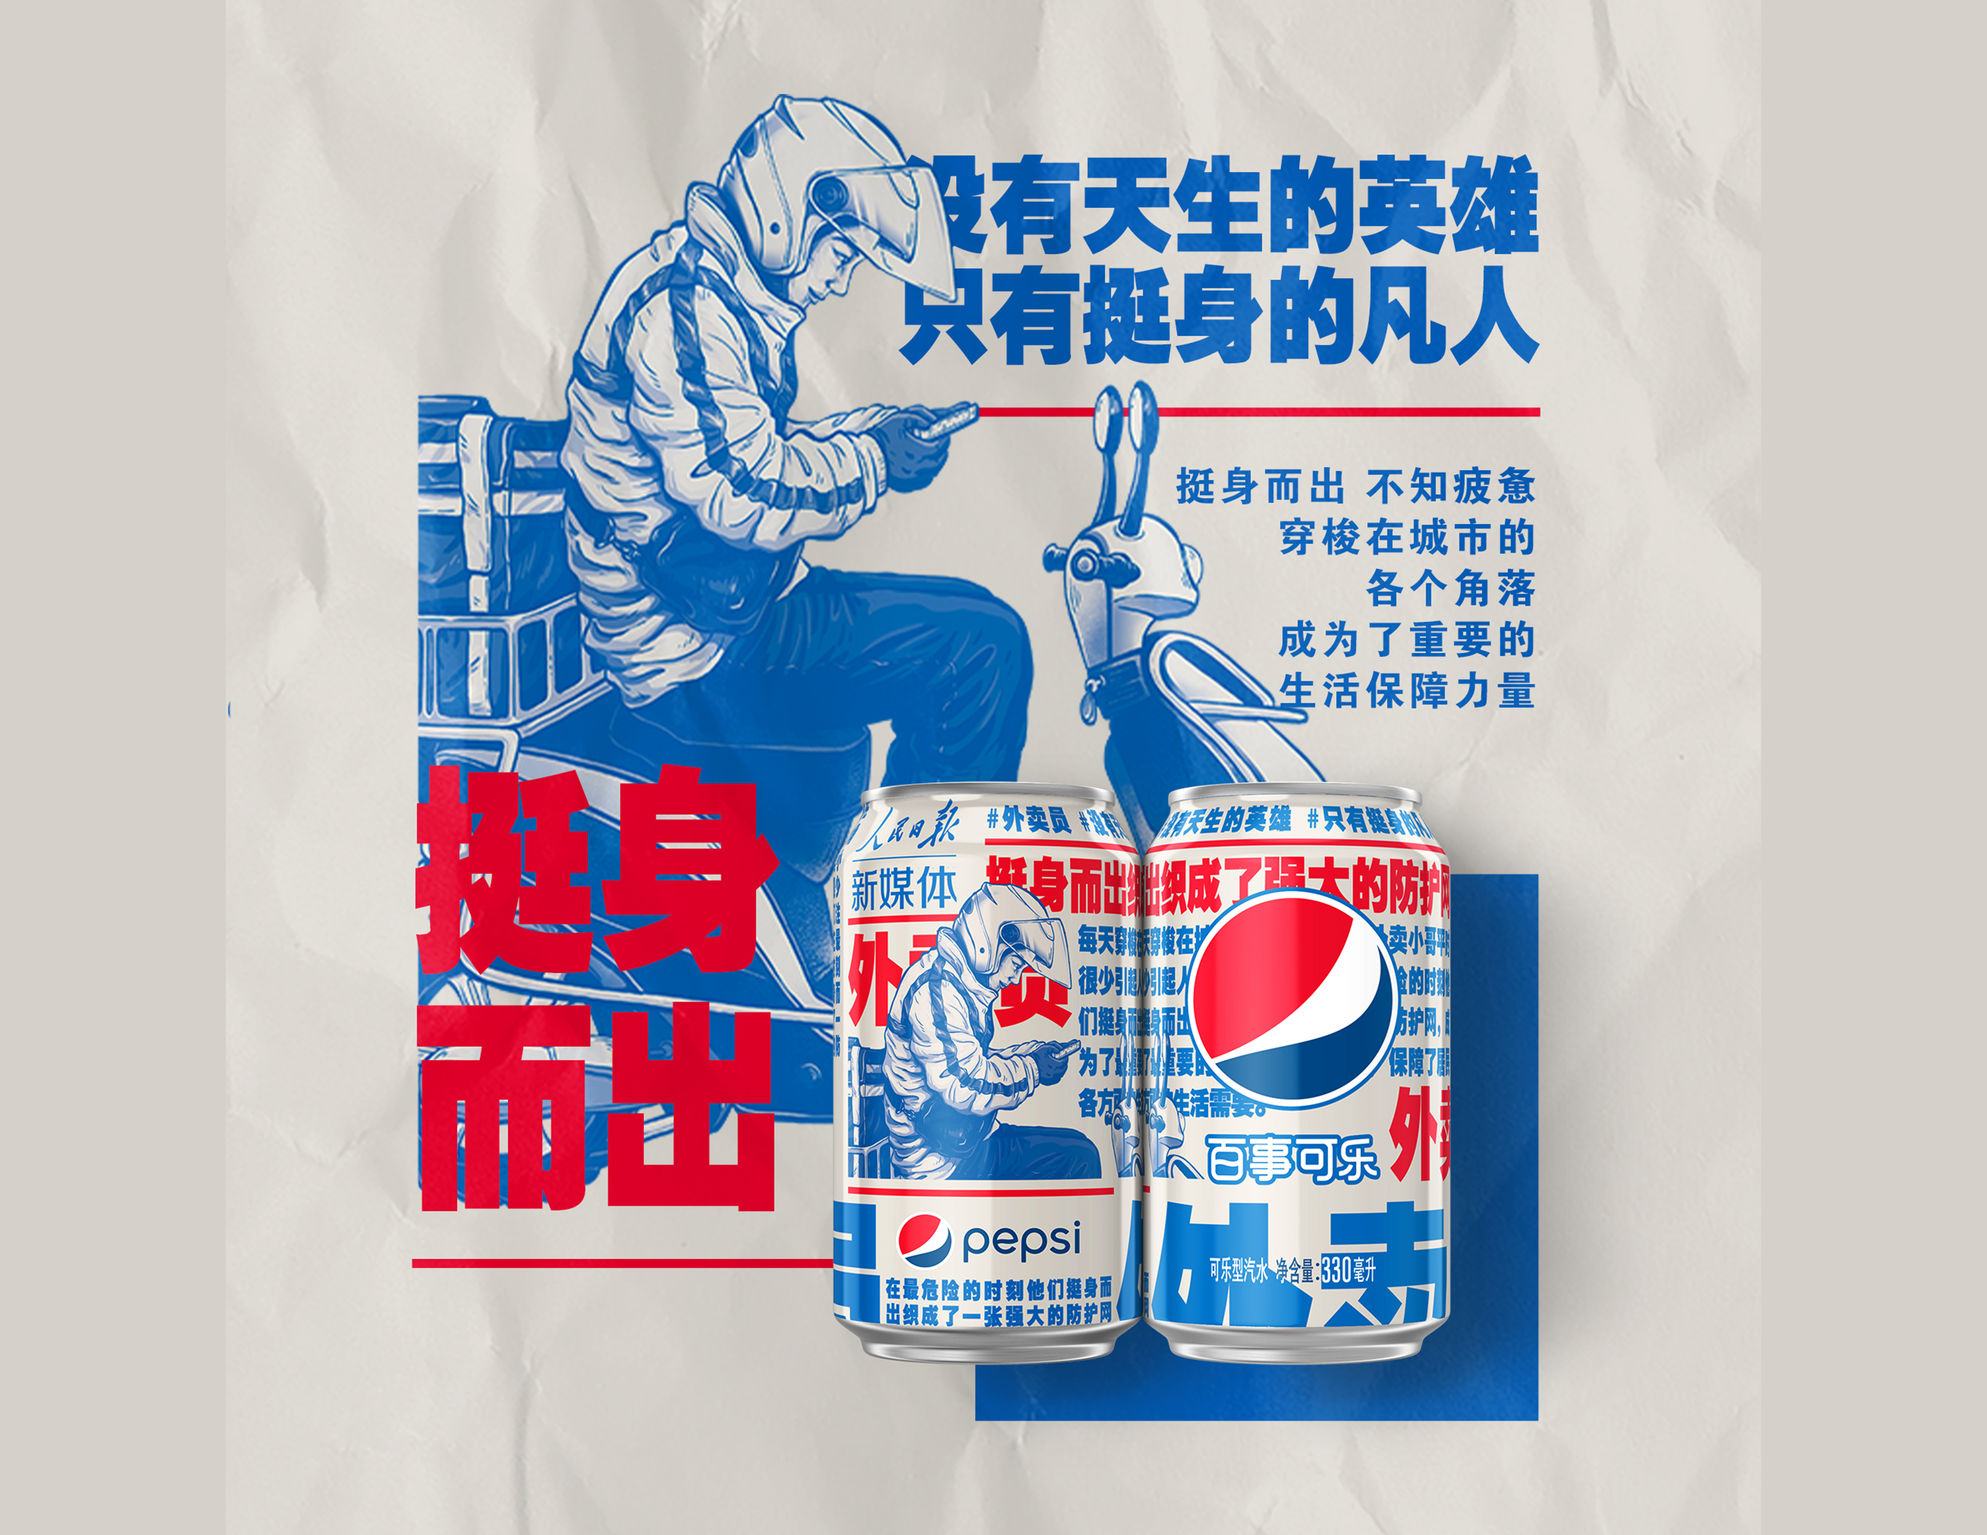 Pepsi x China's People's Daily New Media (GCR)